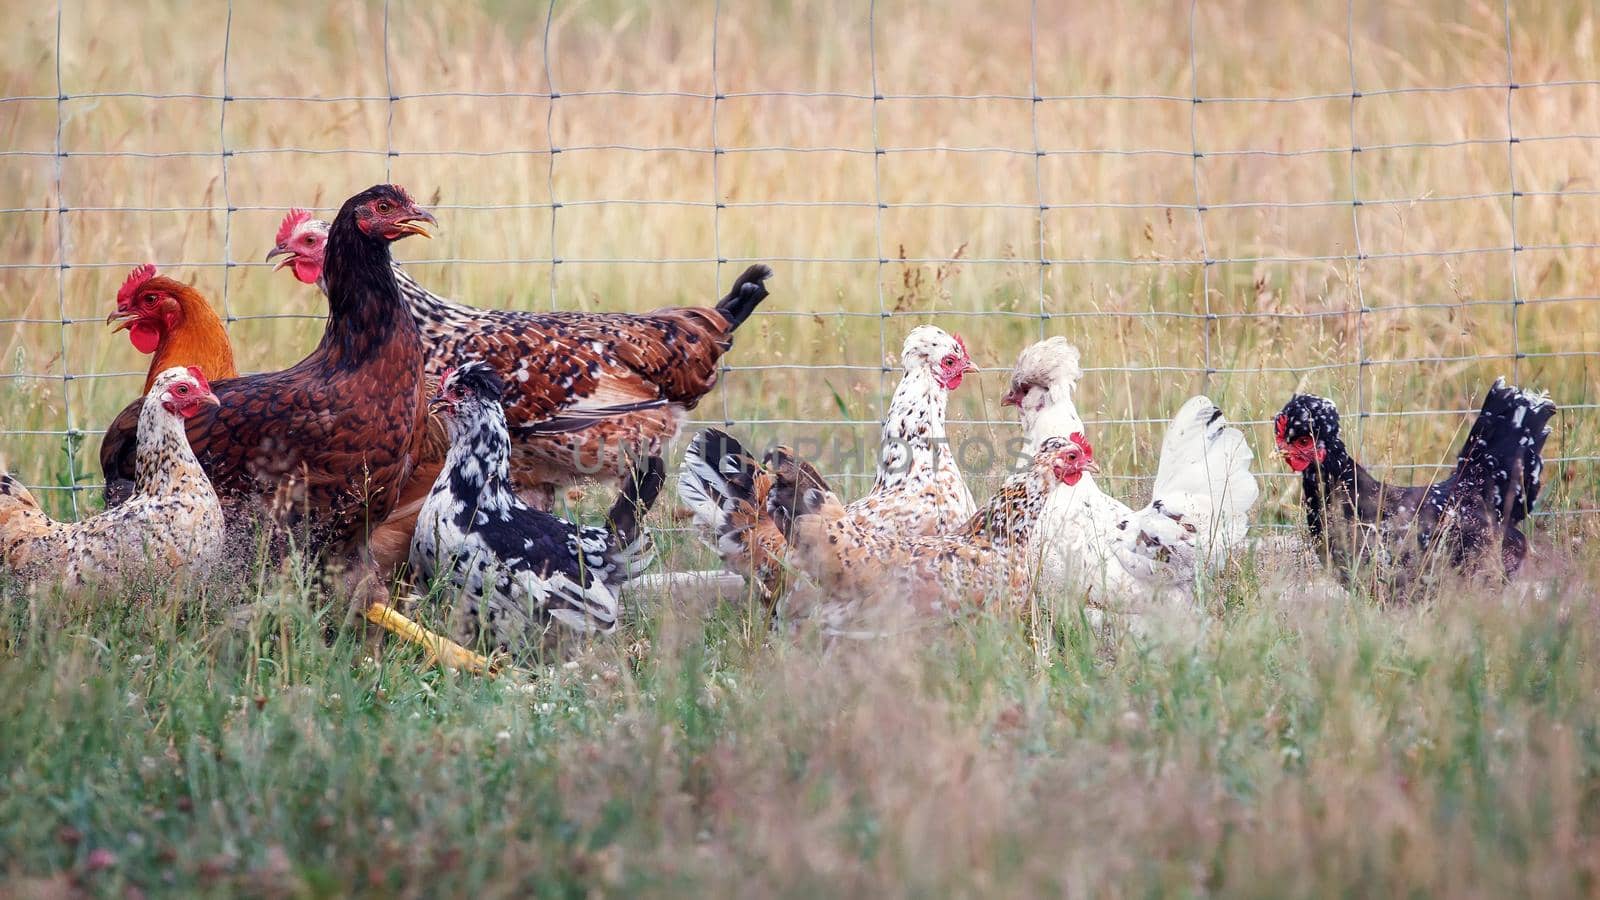 A small flock of hens in a paddock. The birds are kept for eggs. by Lincikas